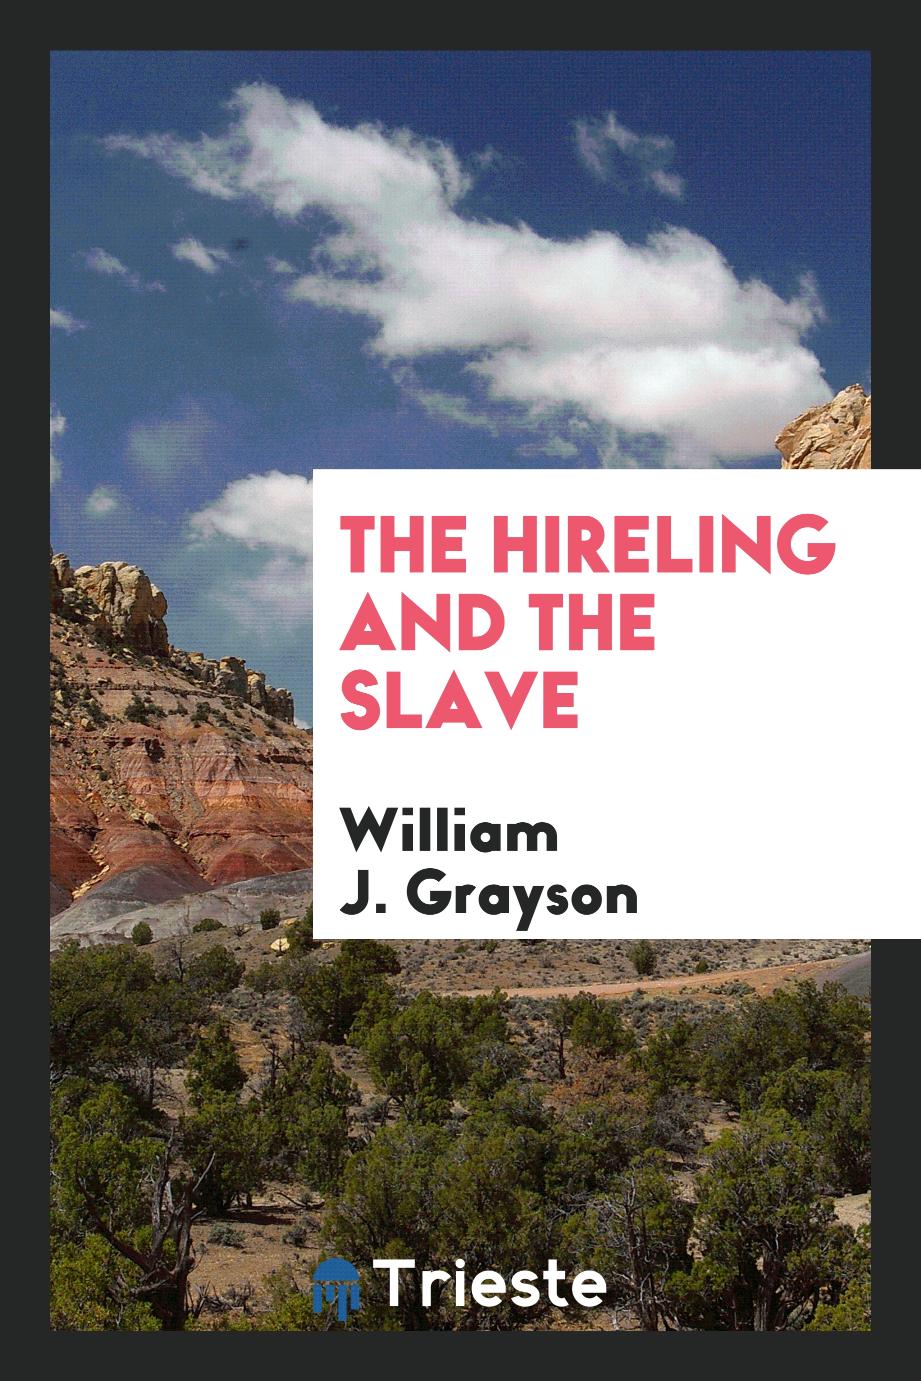 The Hireling and the Slave